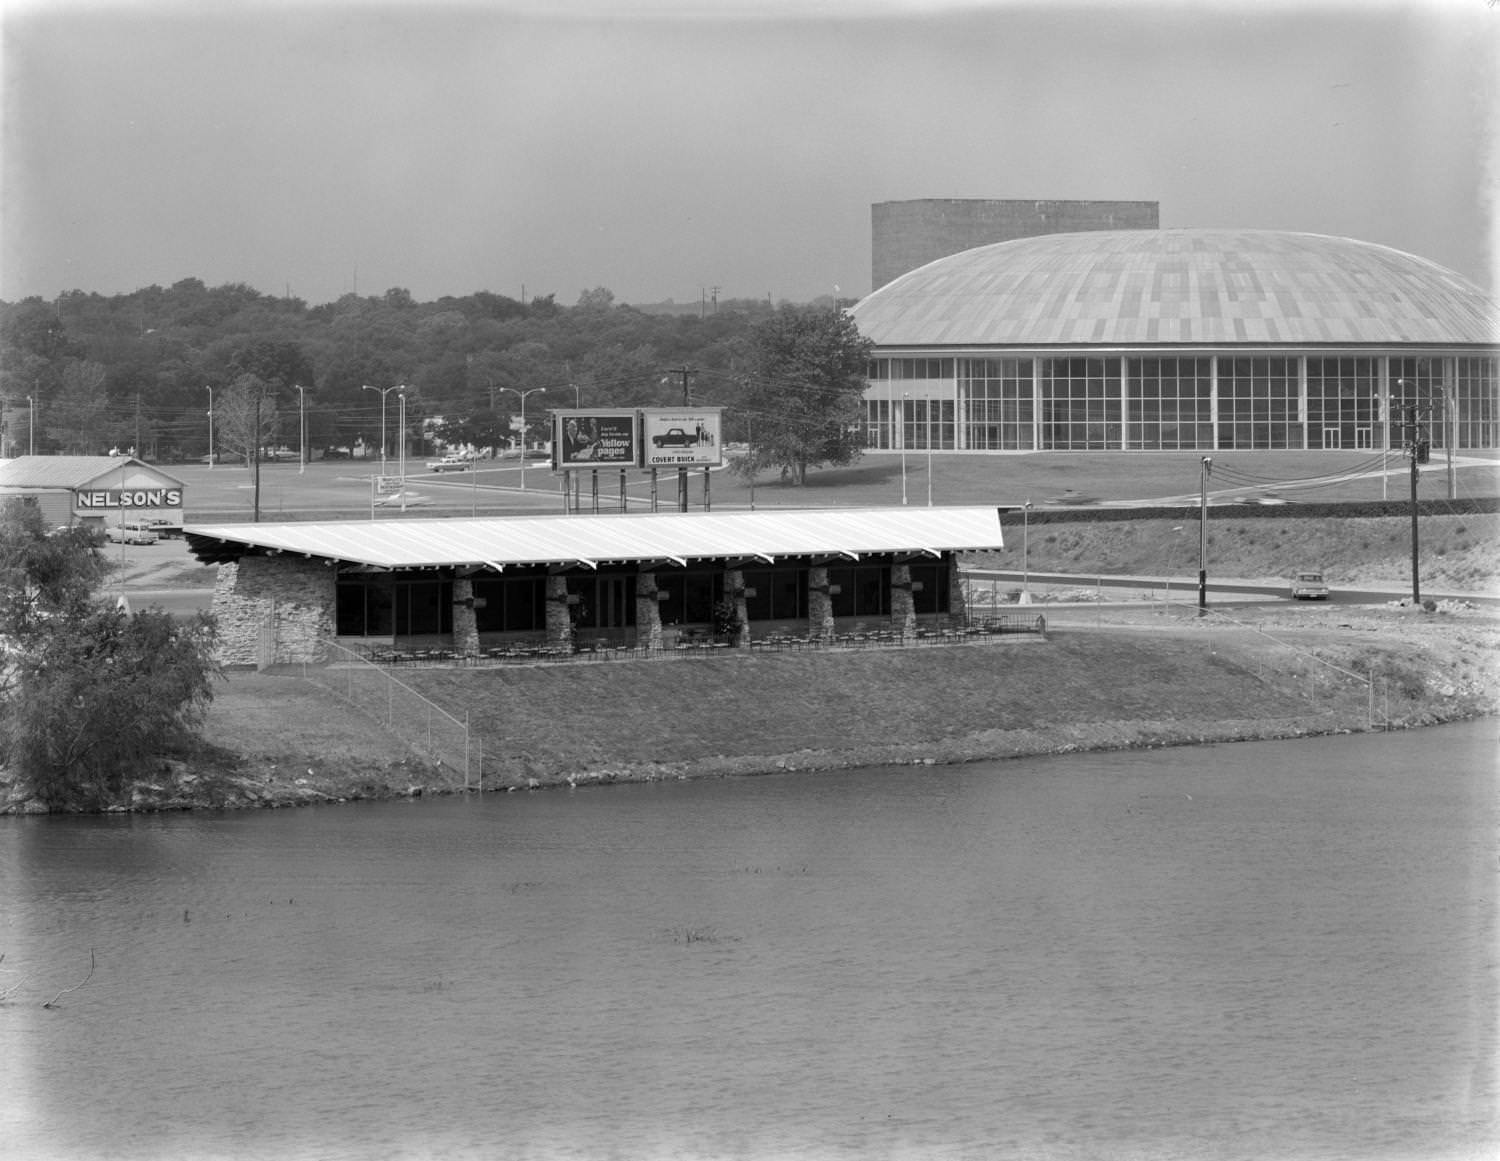 Building on the Colorado River and Palmer Auditorium, 1963